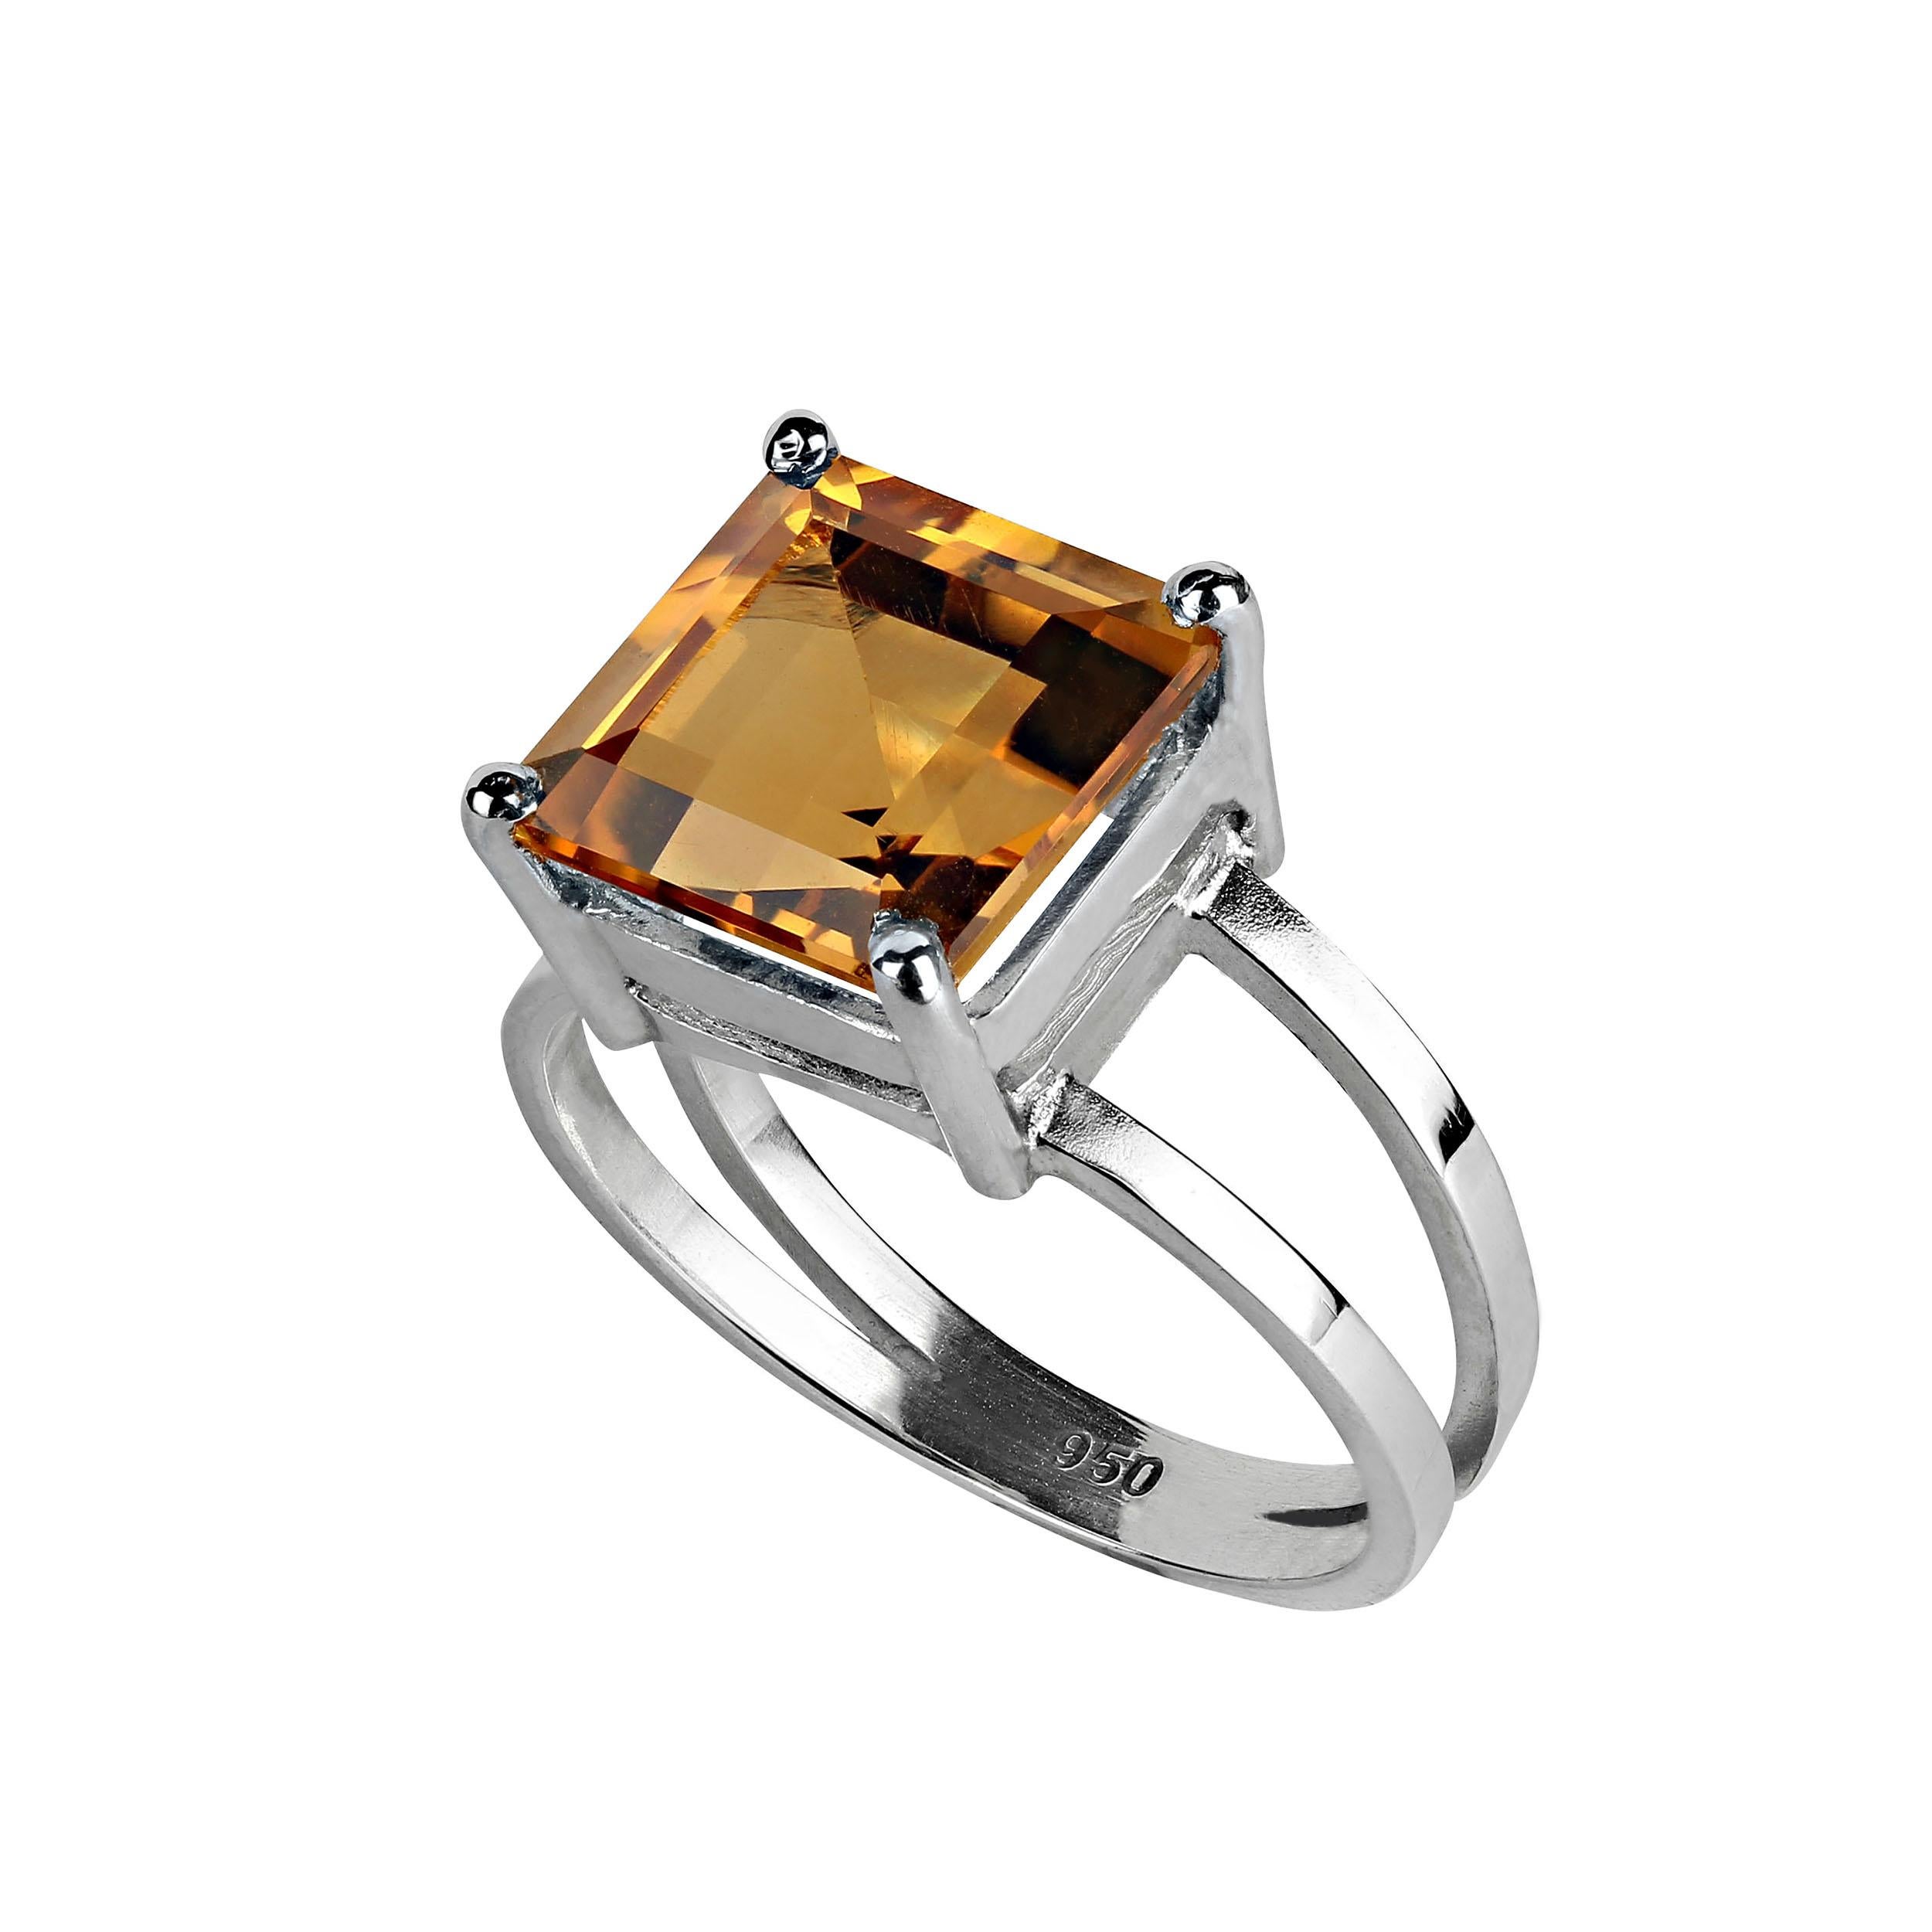 Artisan AJD Vibrant 5.10ct Square Cut Citrine in Sterling Silver Ring